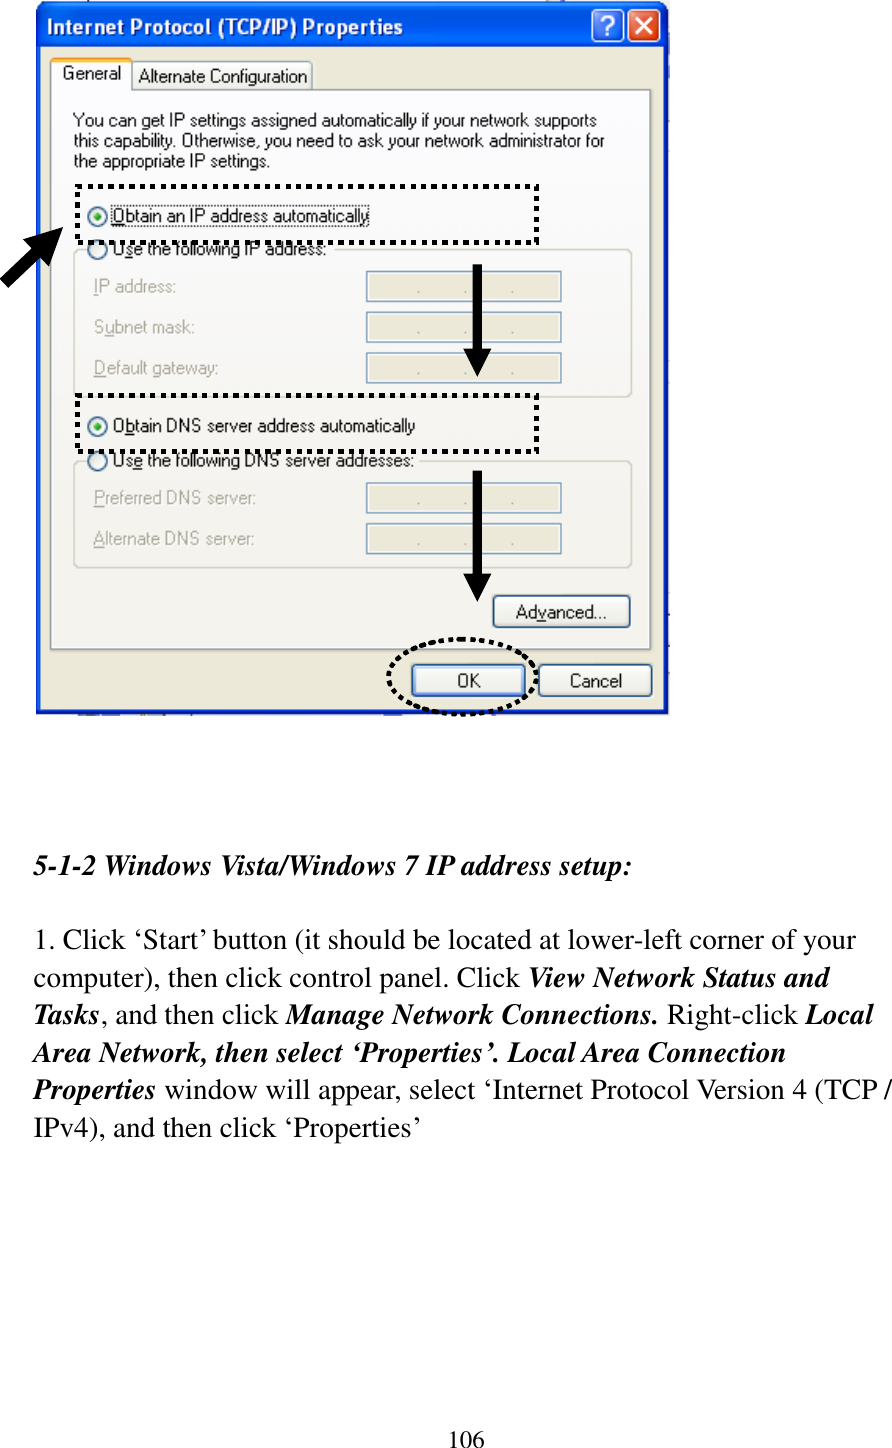 106      5-1-2 Windows Vista/Windows 7 IP address setup:  1. Click „Start‟ button (it should be located at lower-left corner of your computer), then click control panel. Click View Network Status and Tasks, and then click Manage Network Connections. Right-click Local Area Network, then select ‘Properties’. Local Area Connection Properties window will appear, select „Internet Protocol Version 4 (TCP / IPv4), and then click „Properties‟  